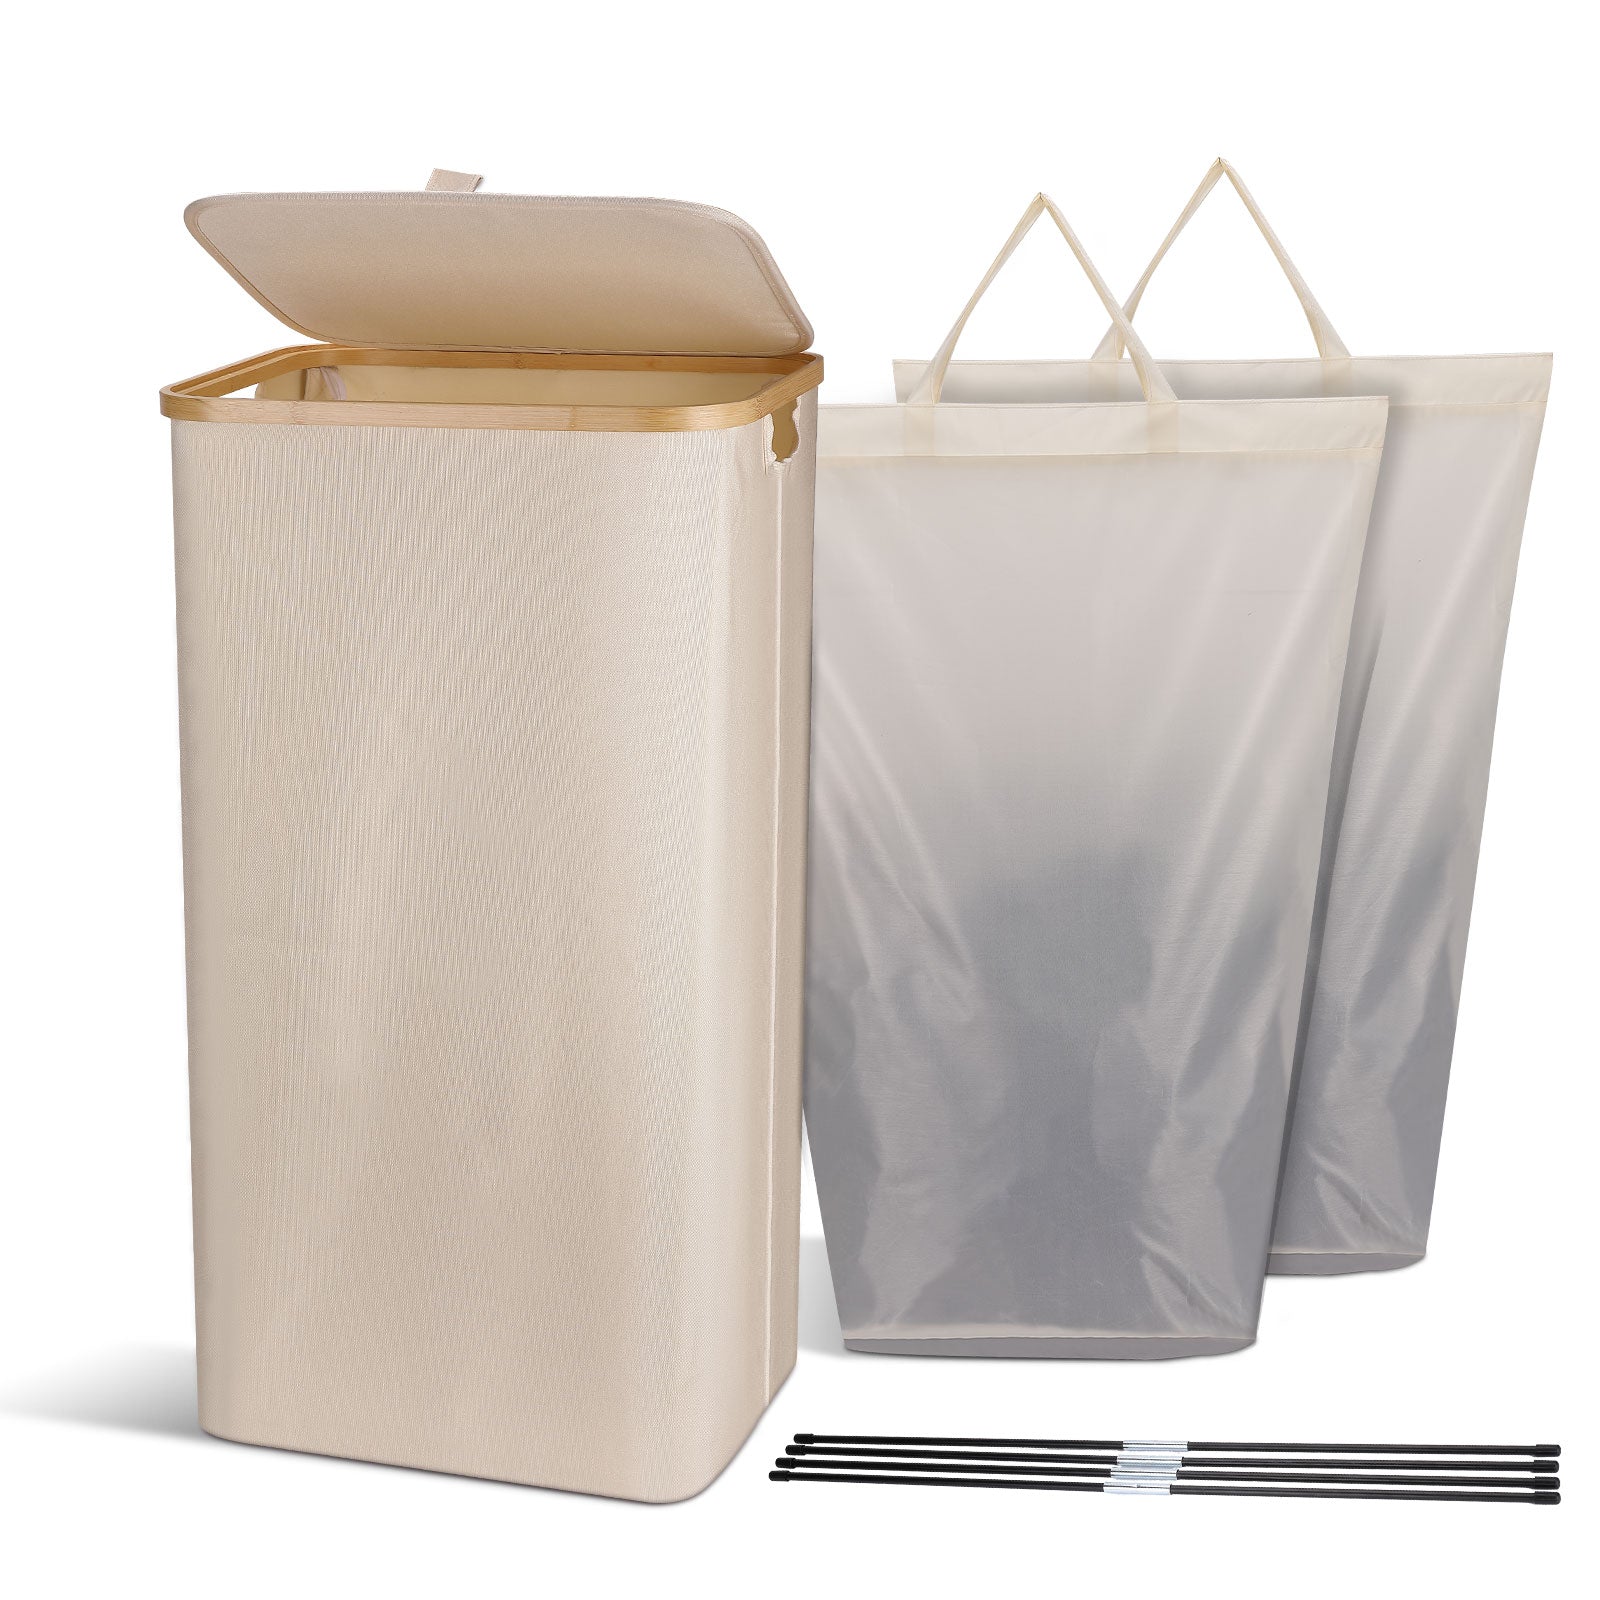 Laundry Basket with Lid, 60L Collapsible Laundry Hamper with